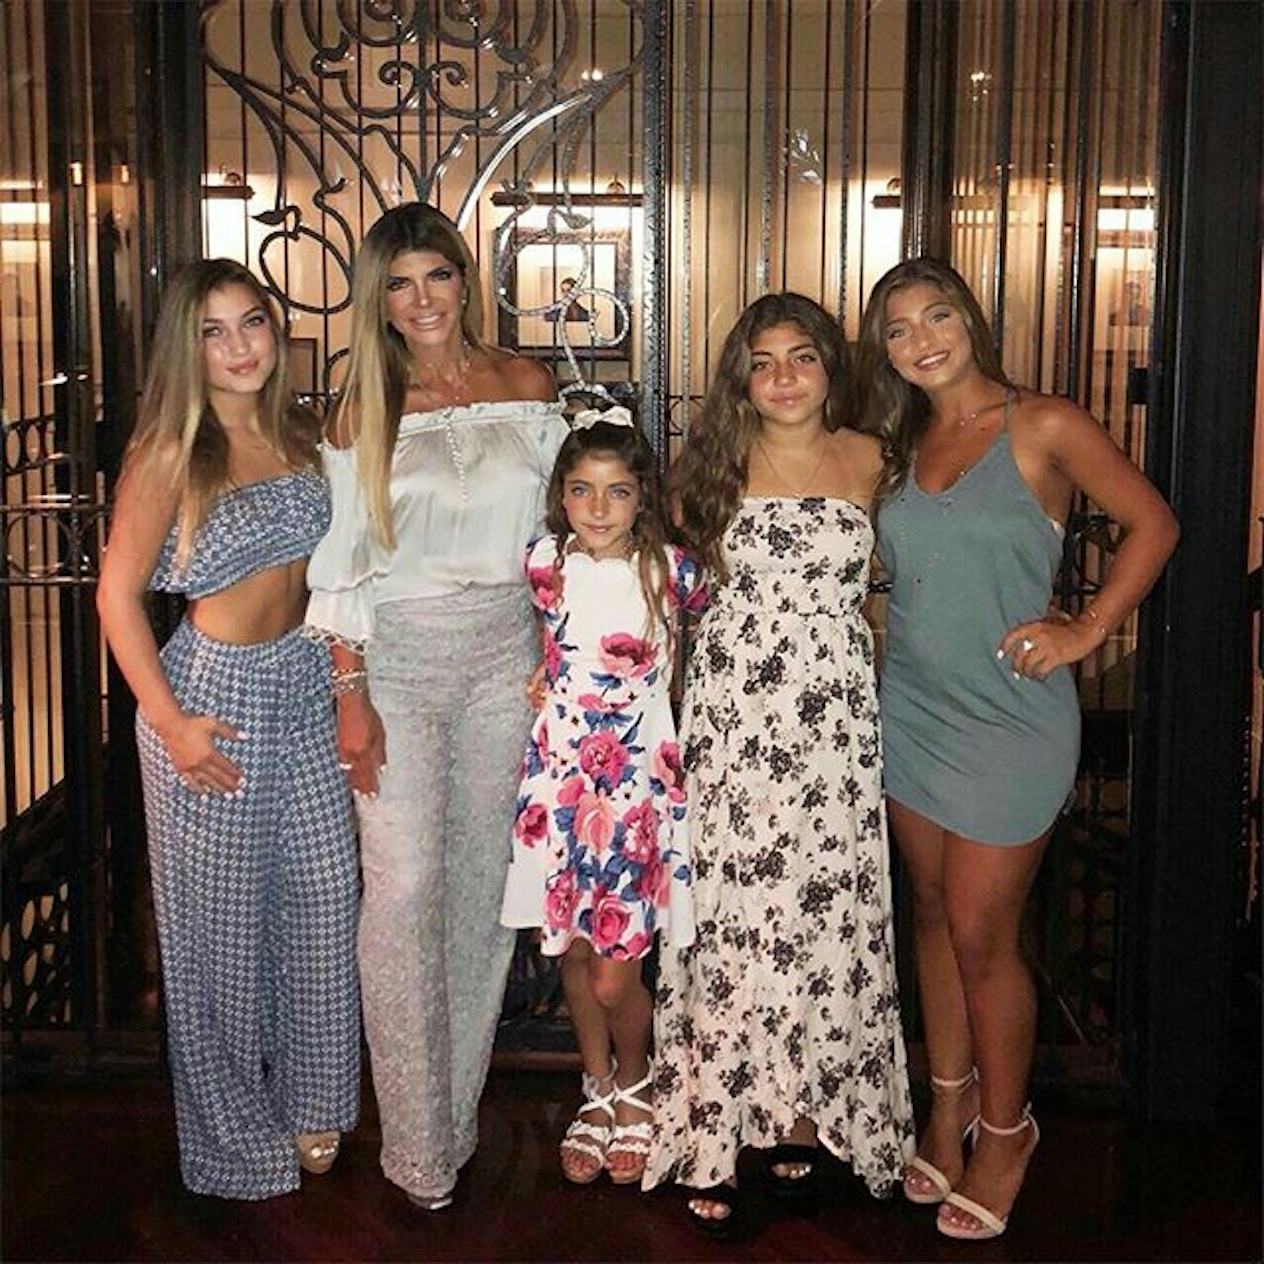 Teresa Giudices Bahamas Vacation Photos With Her Daughters Look Like 